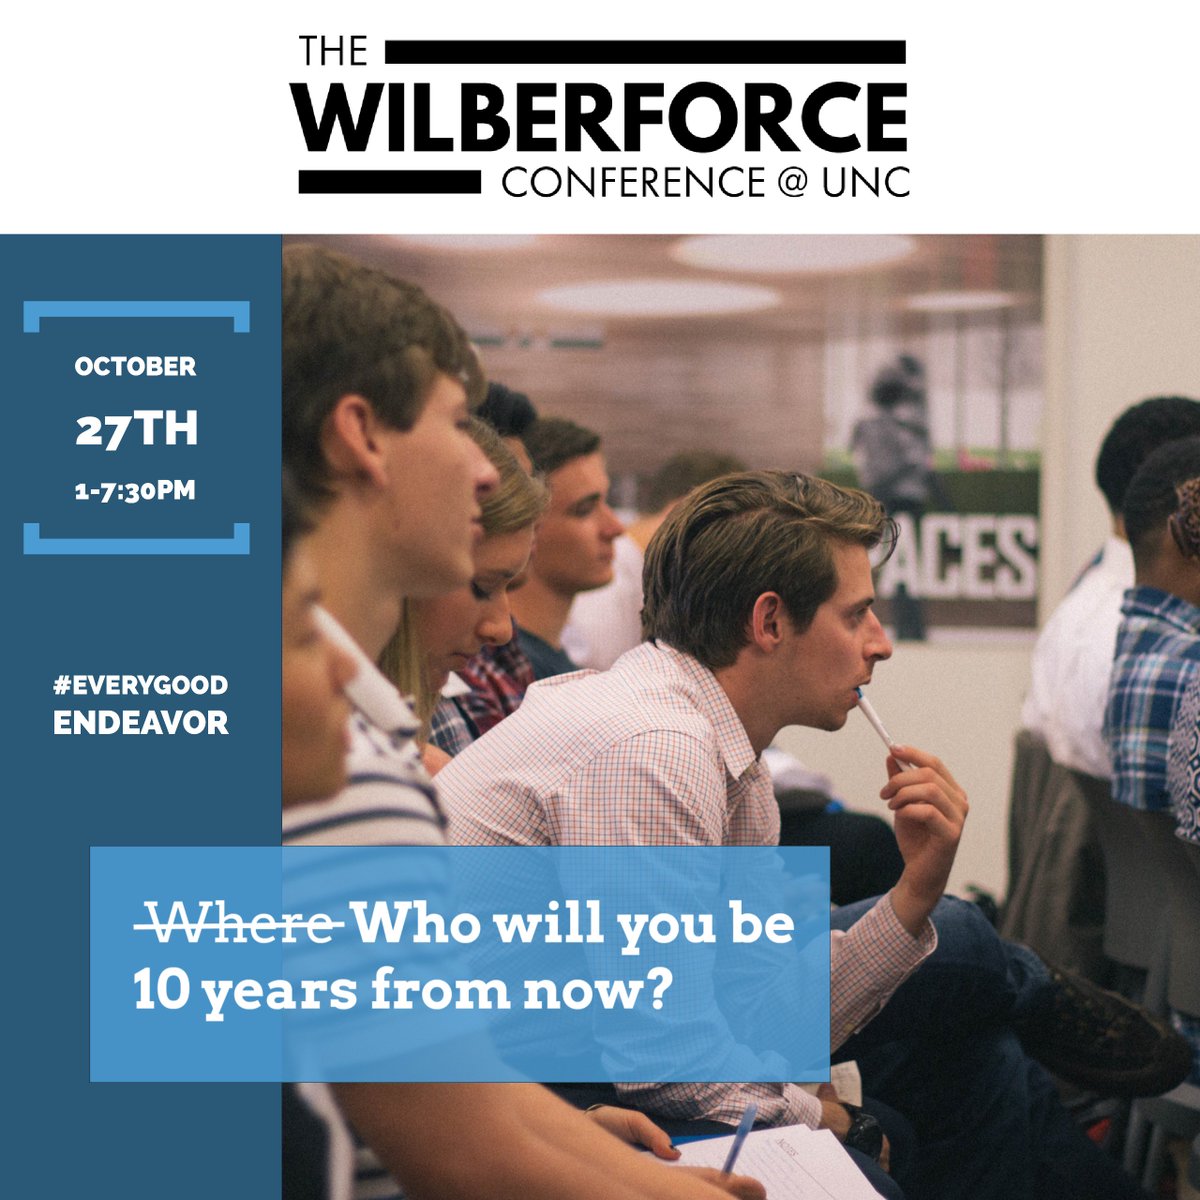 The Wilberforce Conference is this Friday, October 27! For details and to register, visit wilberforceconference.com #EveryGoodEndeavor